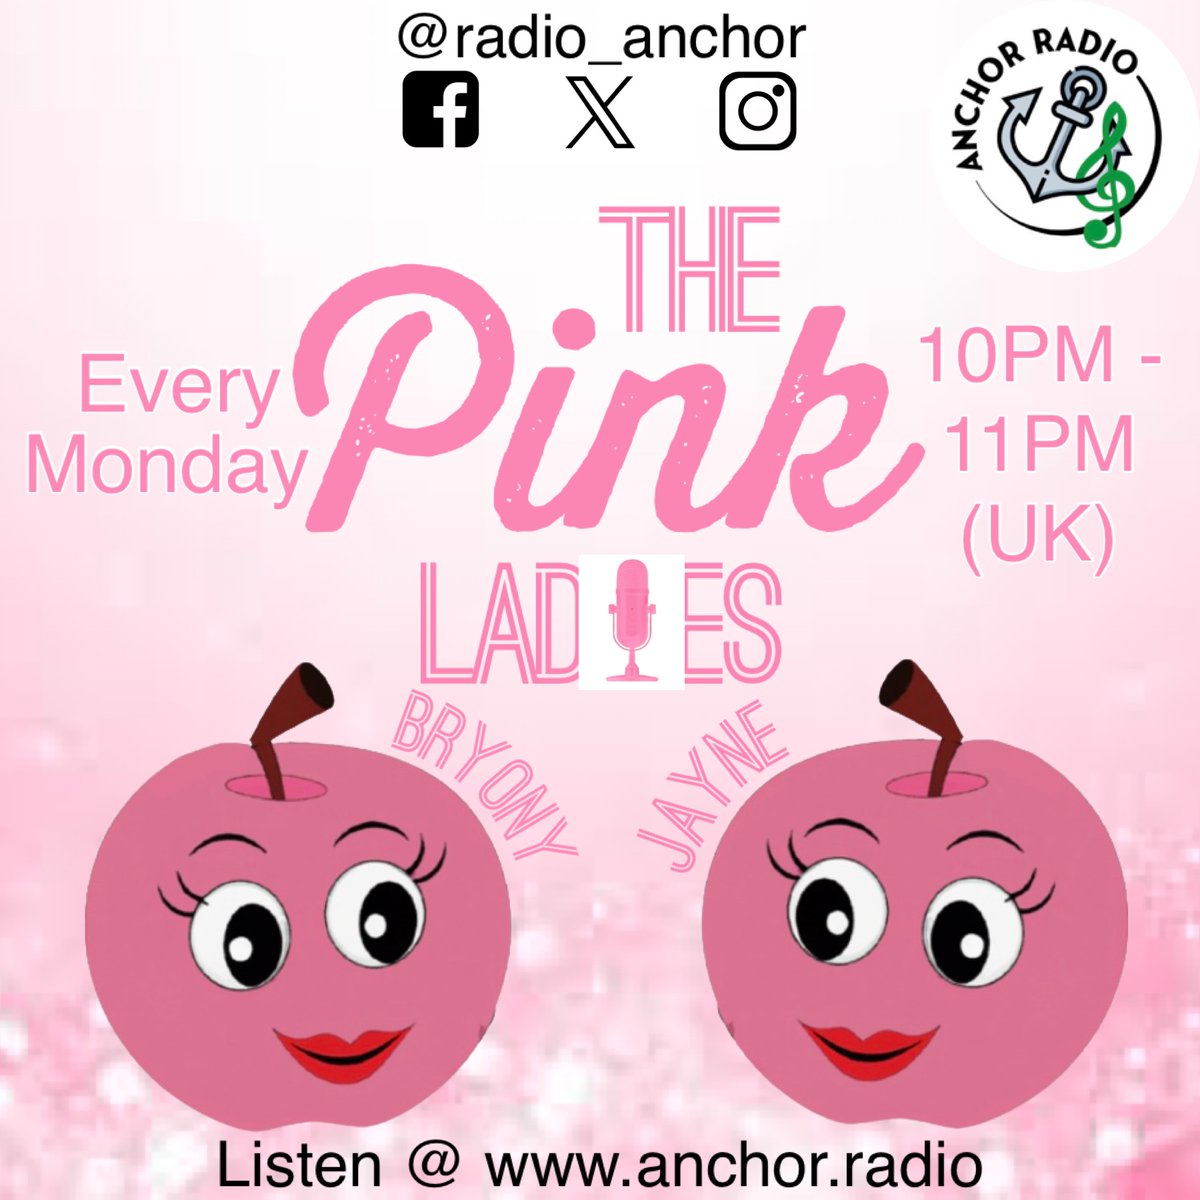 Right now on Anchor Radio, the Pink Ladies are on, with special guest The Flying Scotsman to talk about his experience with Autism. Listen now at anchor.radio or ask your digital assistant to enable Anchor Radio Skill.